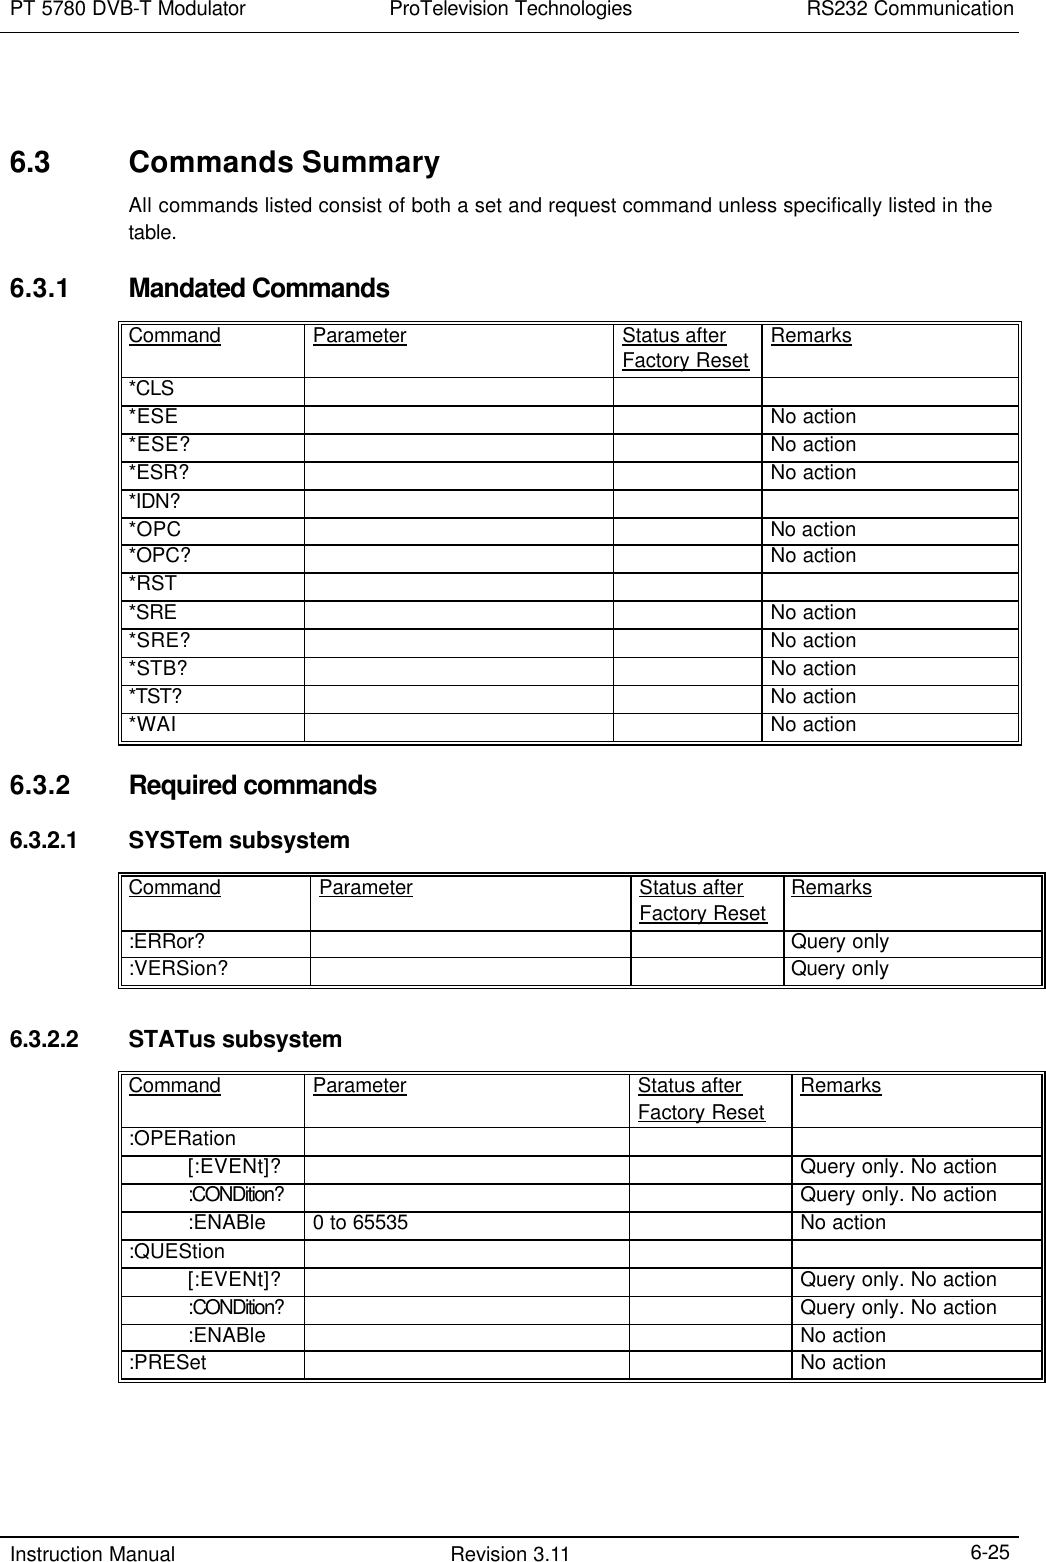 PT 5780 DVB-T Modulator ProTelevision Technologies RS232 Communication  Instruction Manual Revision 3.11    6-25  6.3 Commands Summary All commands listed consist of both a set and request command unless specifically listed in the table. 6.3.1 Mandated Commands  Command Parameter Status after Factory Reset Remarks *CLS       *ESE      No action *ESE?      No action *ESR?      No action *IDN?       *OPC      No action *OPC?      No action *RST       *SRE      No action *SRE?      No action *STB?      No action *TST?      No action *WAI      No action  6.3.2 Required commands 6.3.2.1 SYSTem subsystem Command Parameter Status after Factory Reset Remarks :ERRor?      Query only :VERSion?      Query only   6.3.2.2 STATus subsystem Command Parameter Status after Factory Reset Remarks :OPERation        [:EVENt]?      Query only. No action  :CONDition?      Query only. No action  :ENABle 0 to 65535    No action :QUEStion        [:EVENt]?      Query only. No action  :CONDition?      Query only. No action  :ENABle      No action :PRESet      No action  